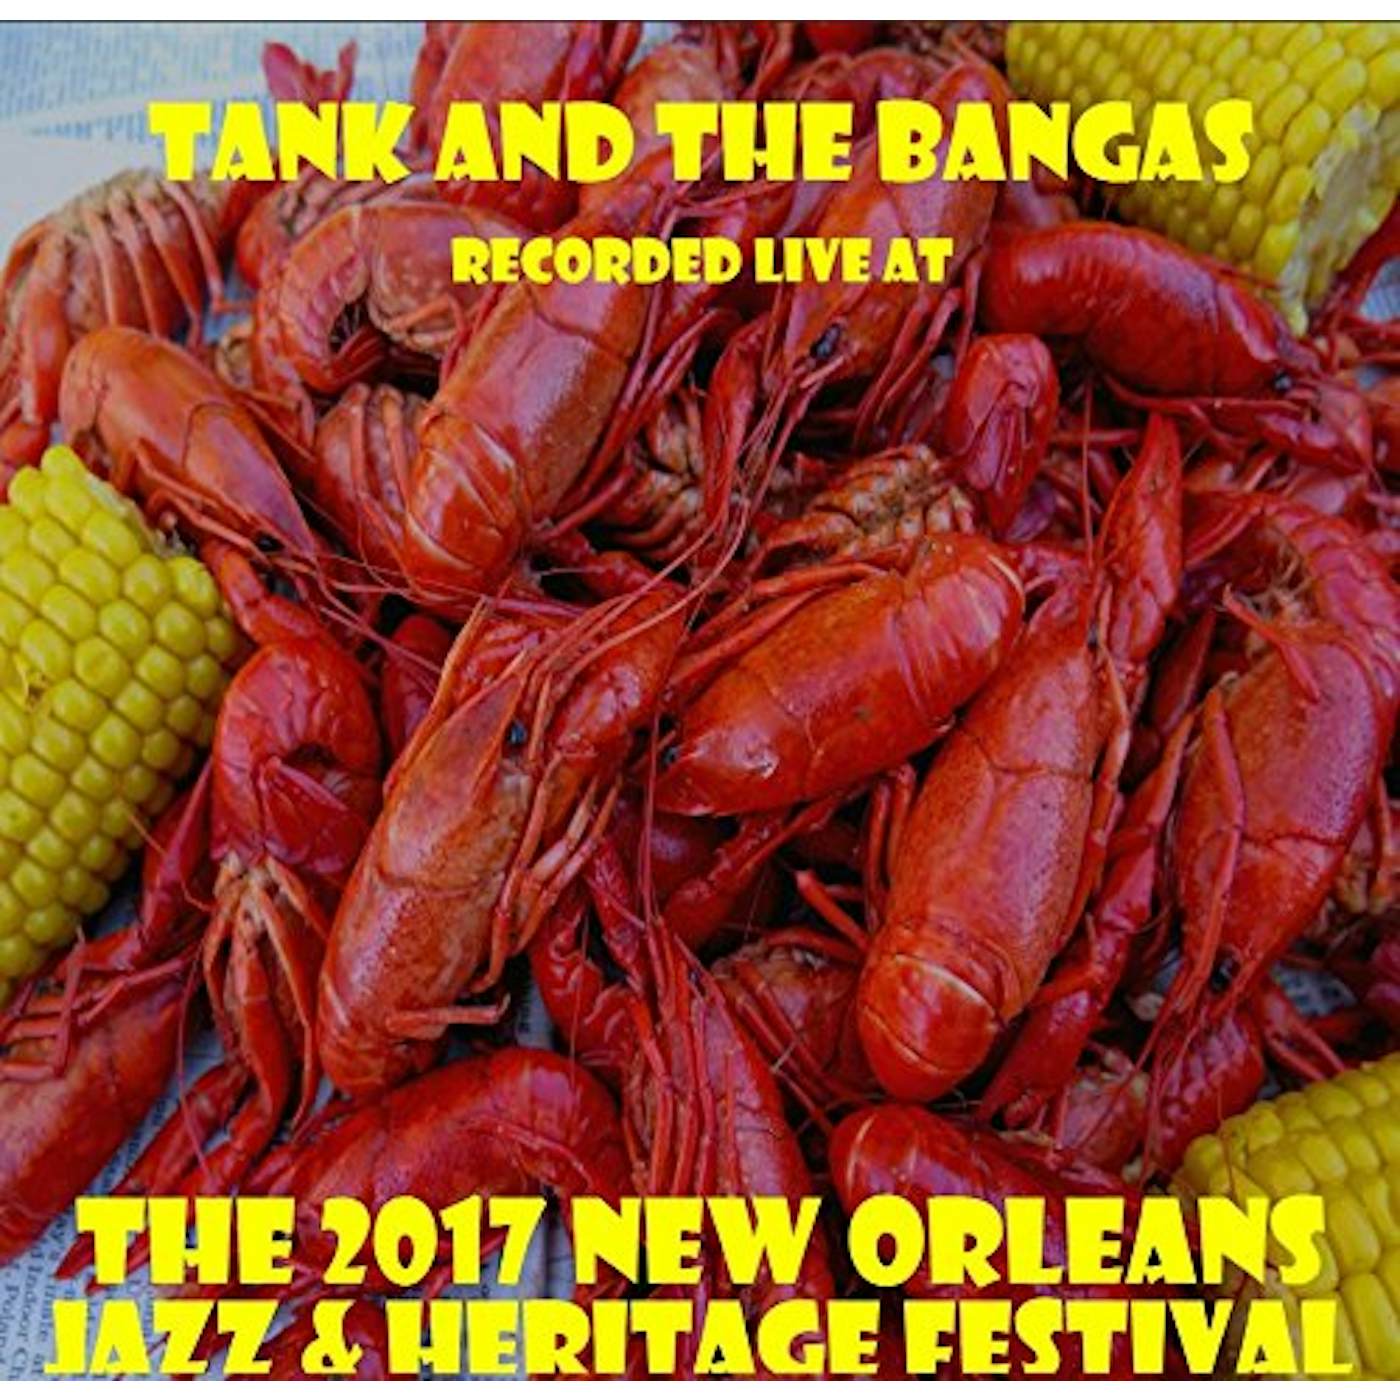 Tank and The Bangas LIVE AT JAZZFEST 2017 CD